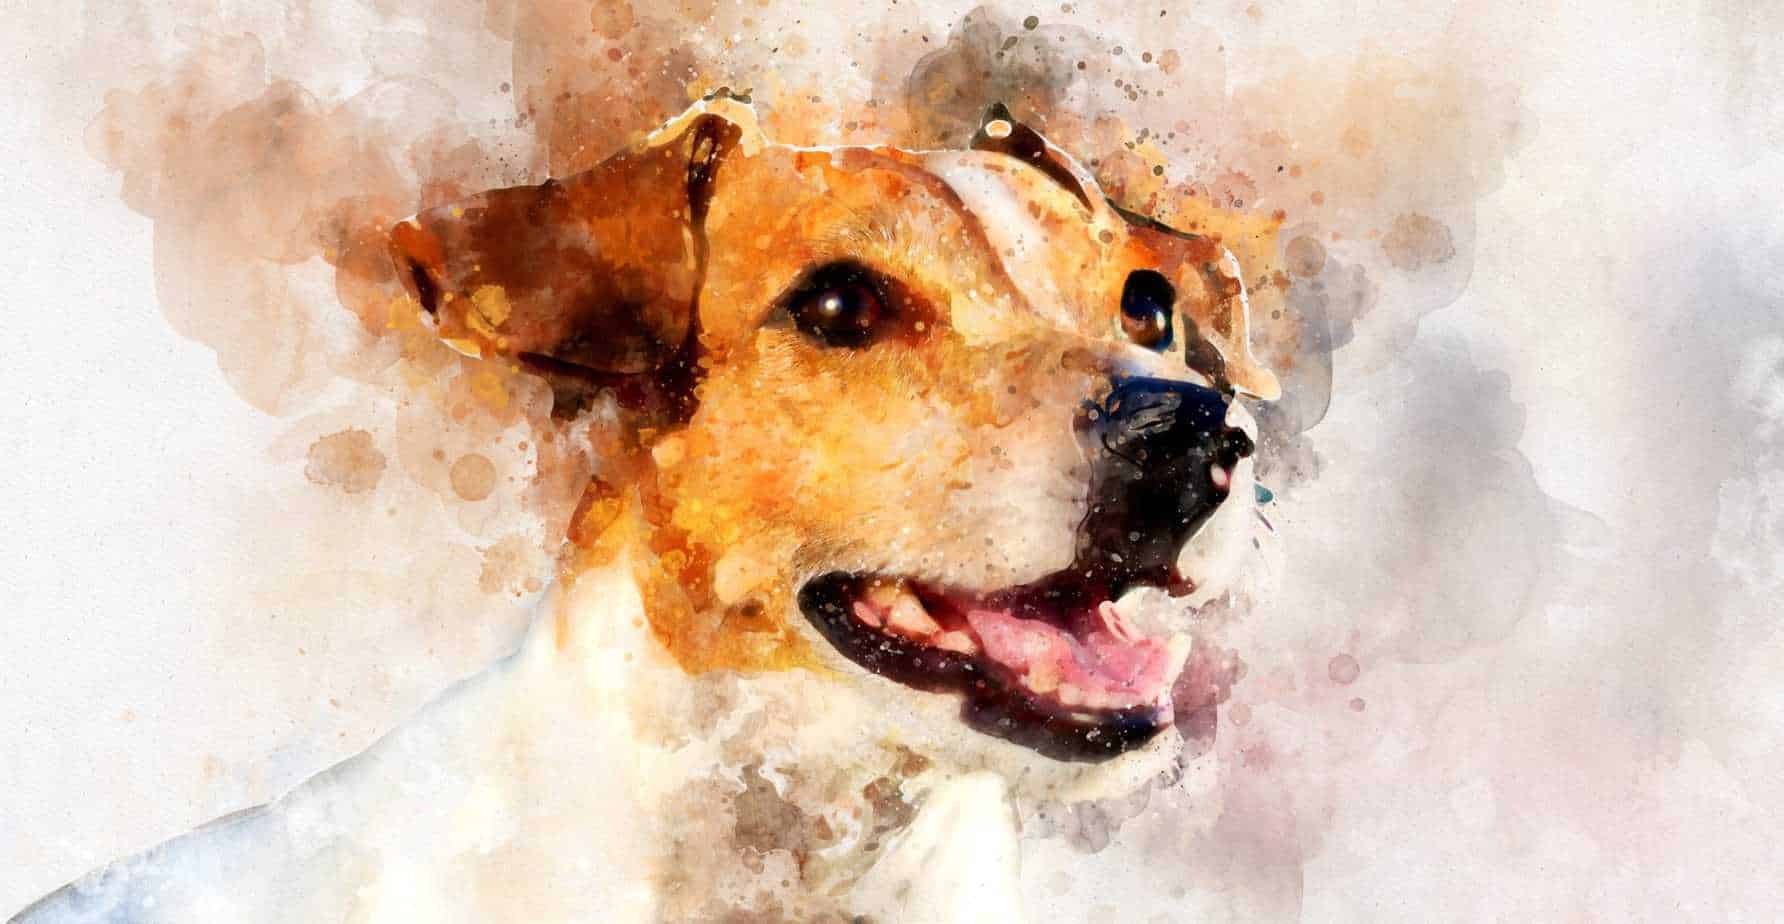 Painted portrait of Jack Russell Terrier. Immortalize your pet with something special like a portrait, a donation to an animal shelter, a tree planted in their honor, or a tattoo.